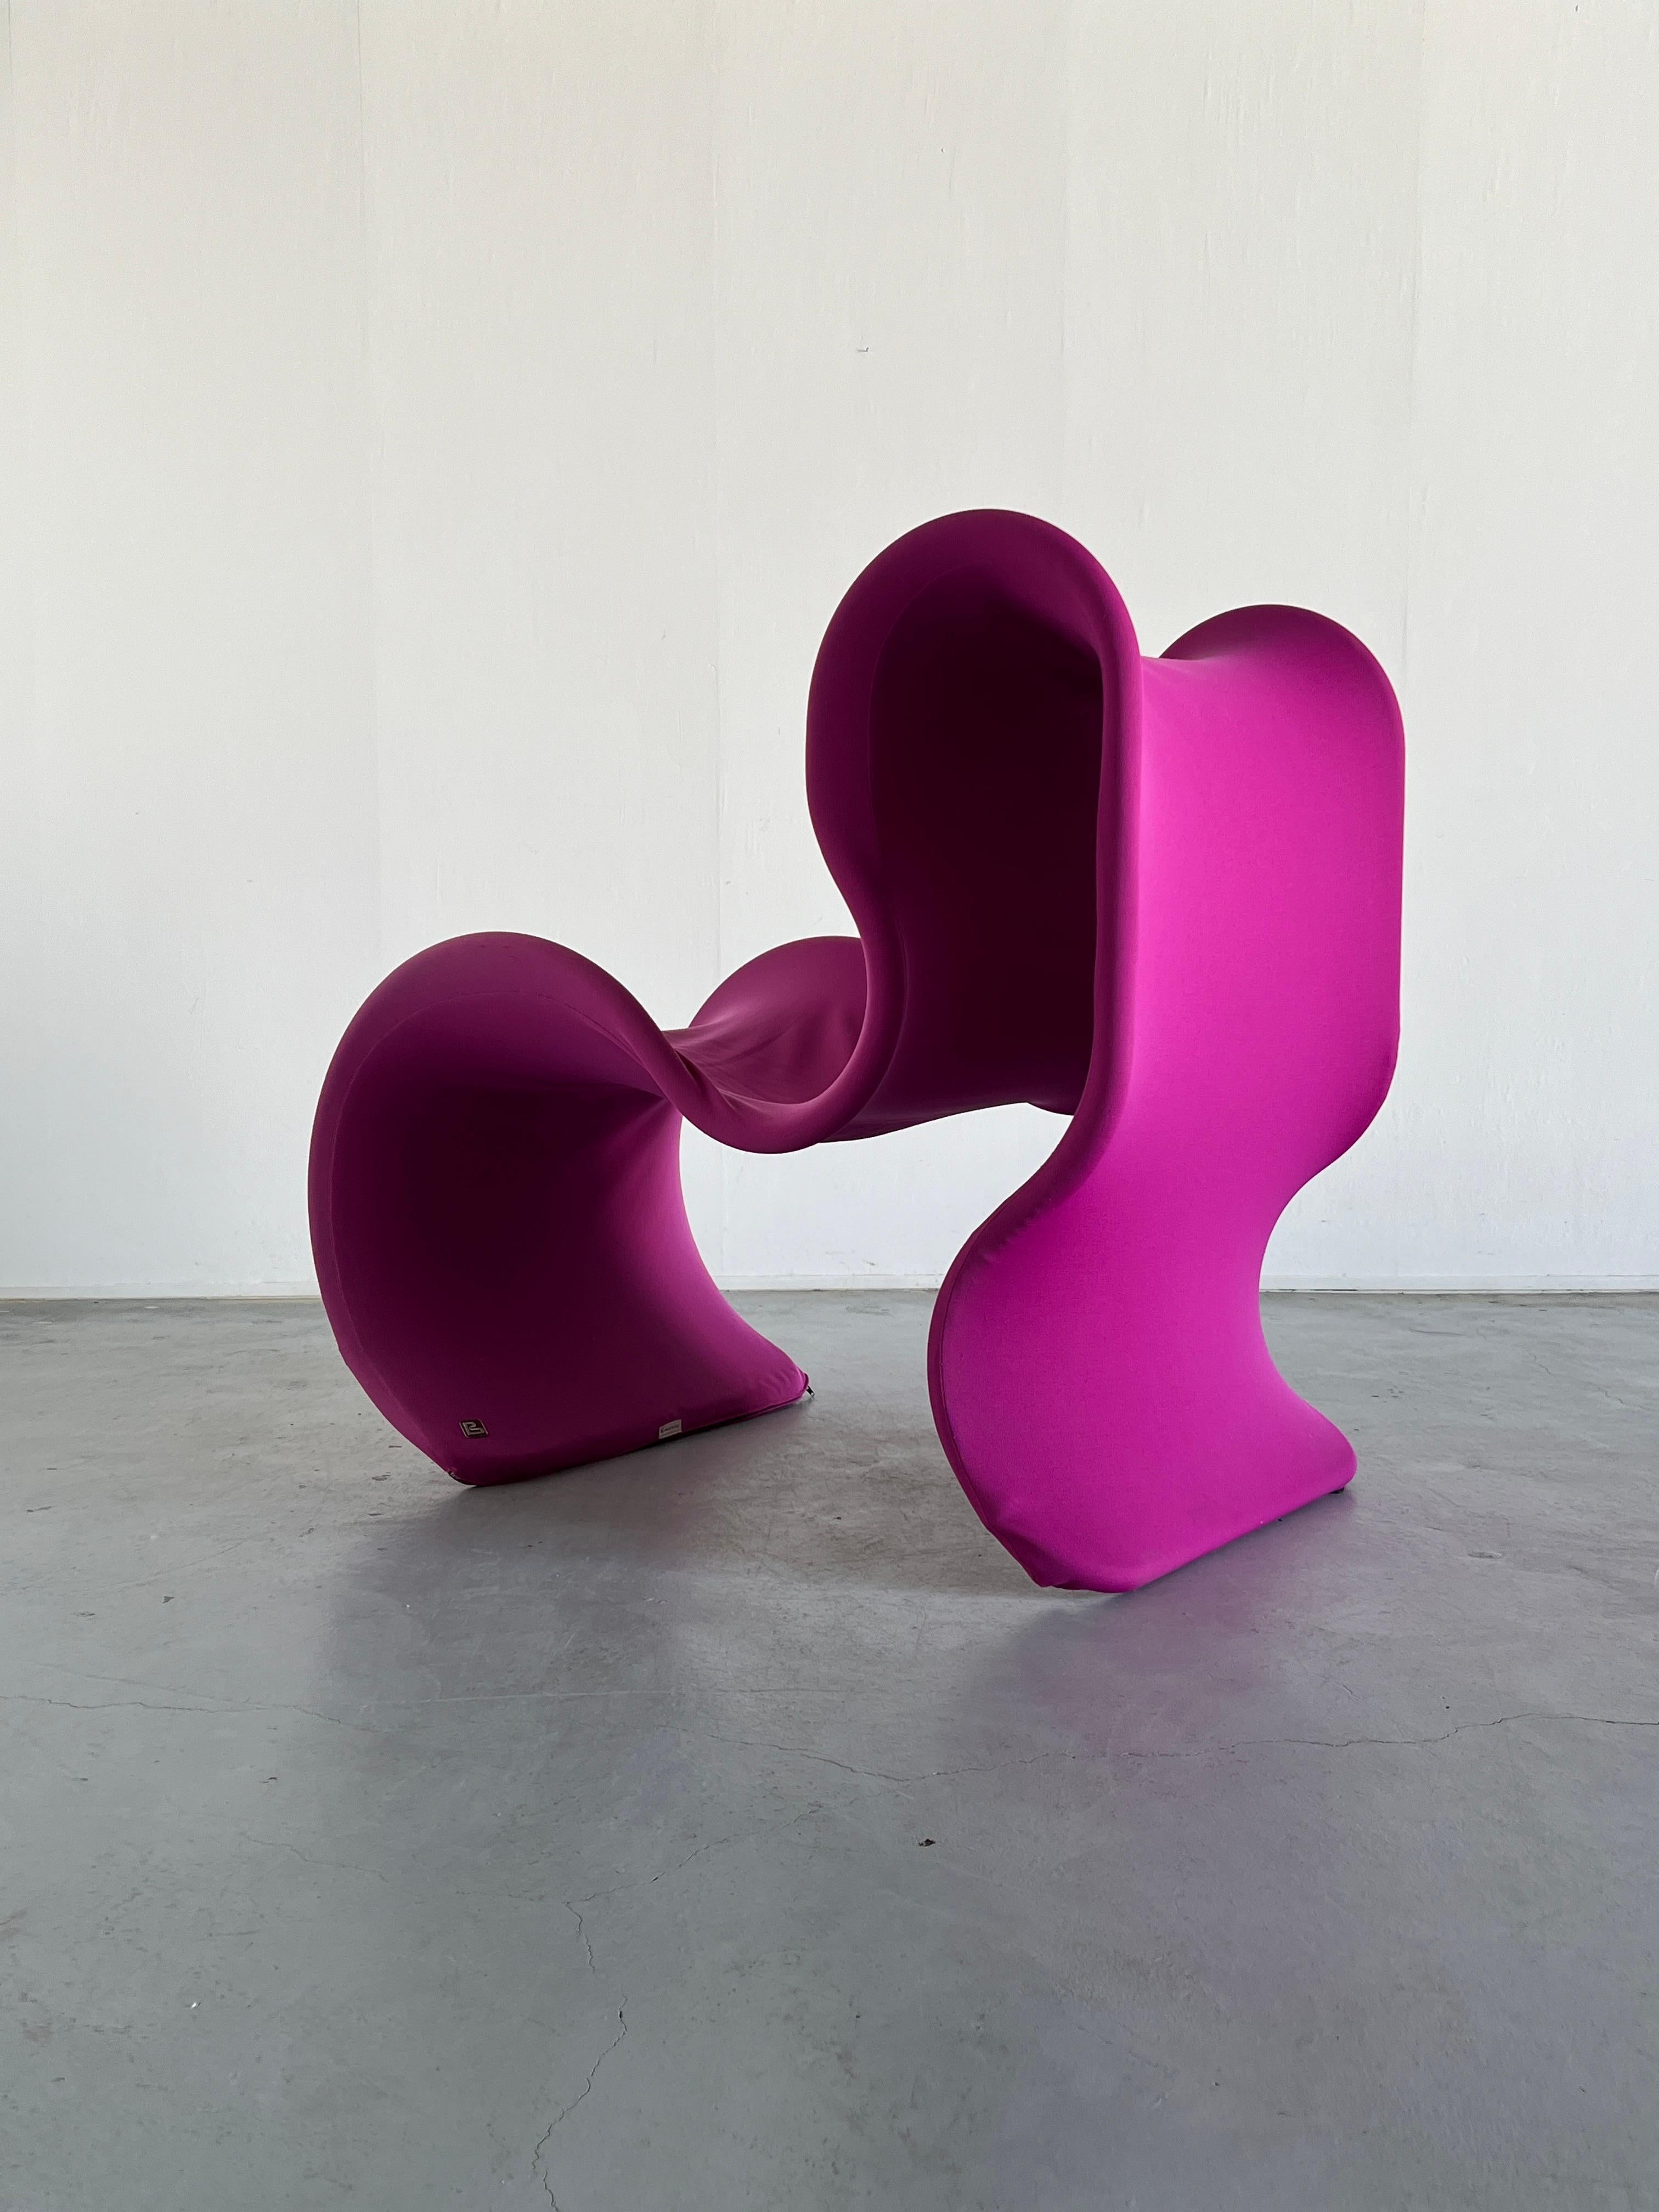 Large Fiocco Armchair by Gianni Pareschi for Busnelli in Pink, 1970s For Sale 1